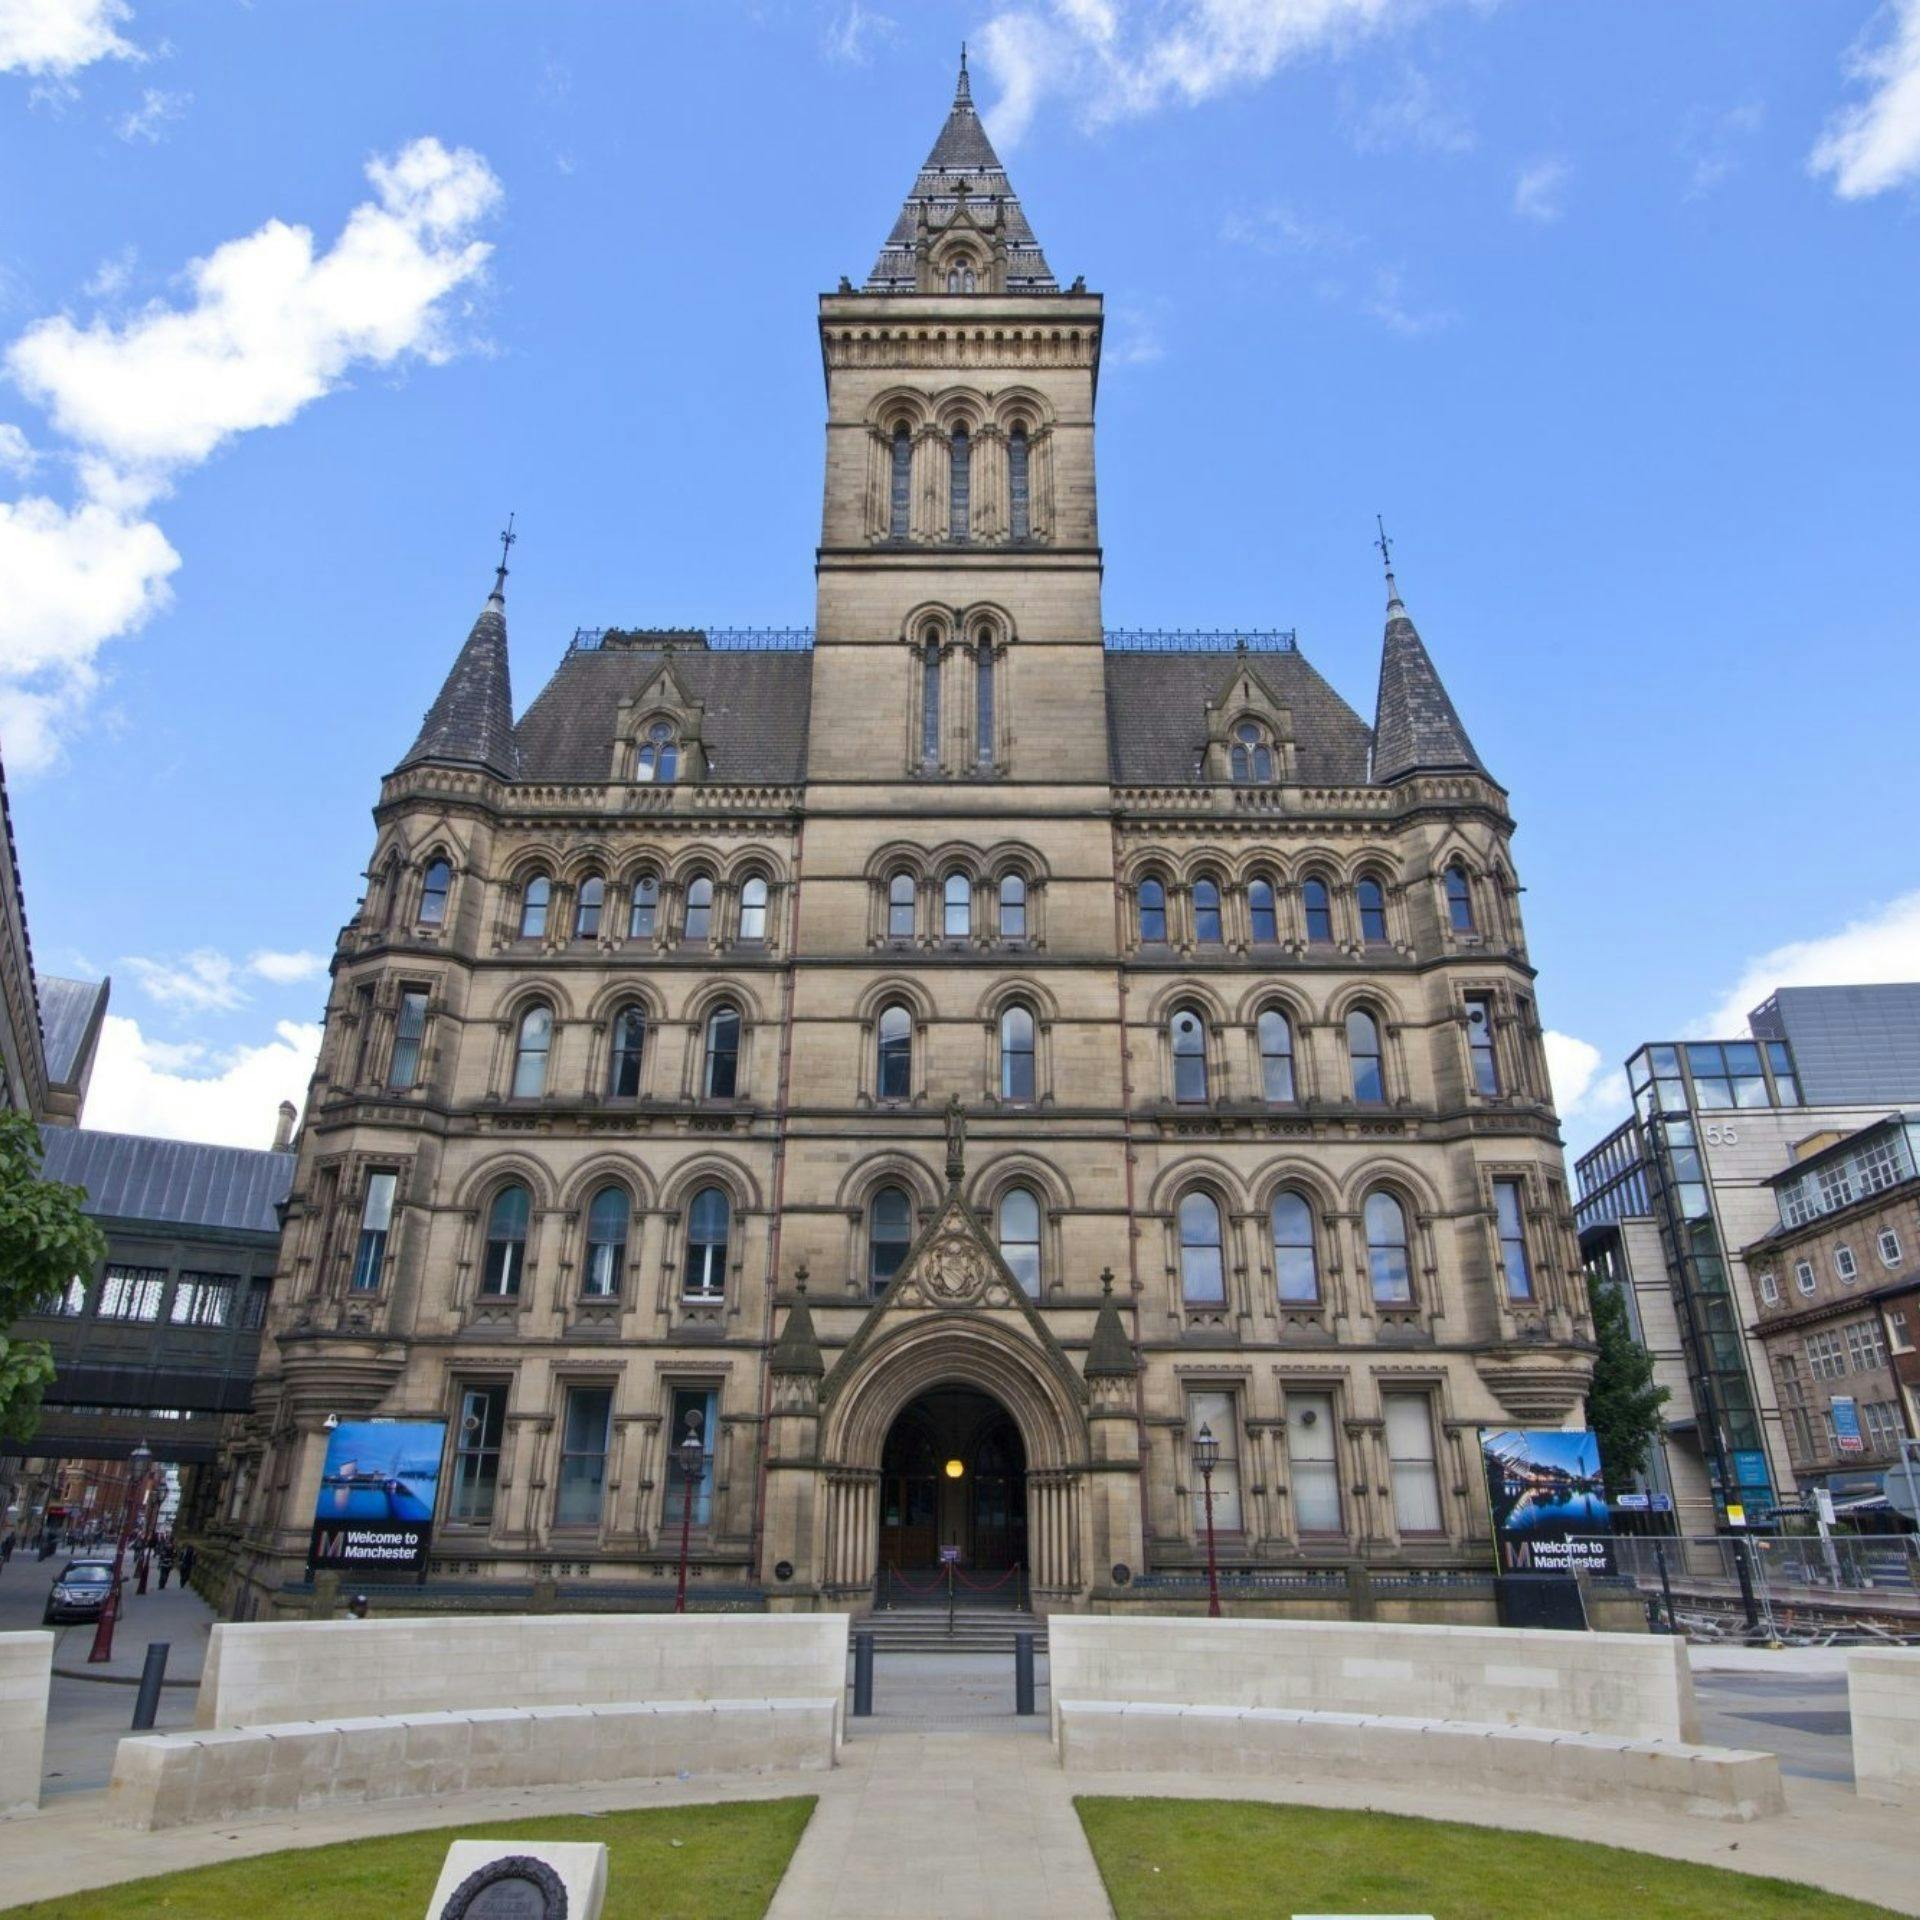 The front facade of Manchester town hall